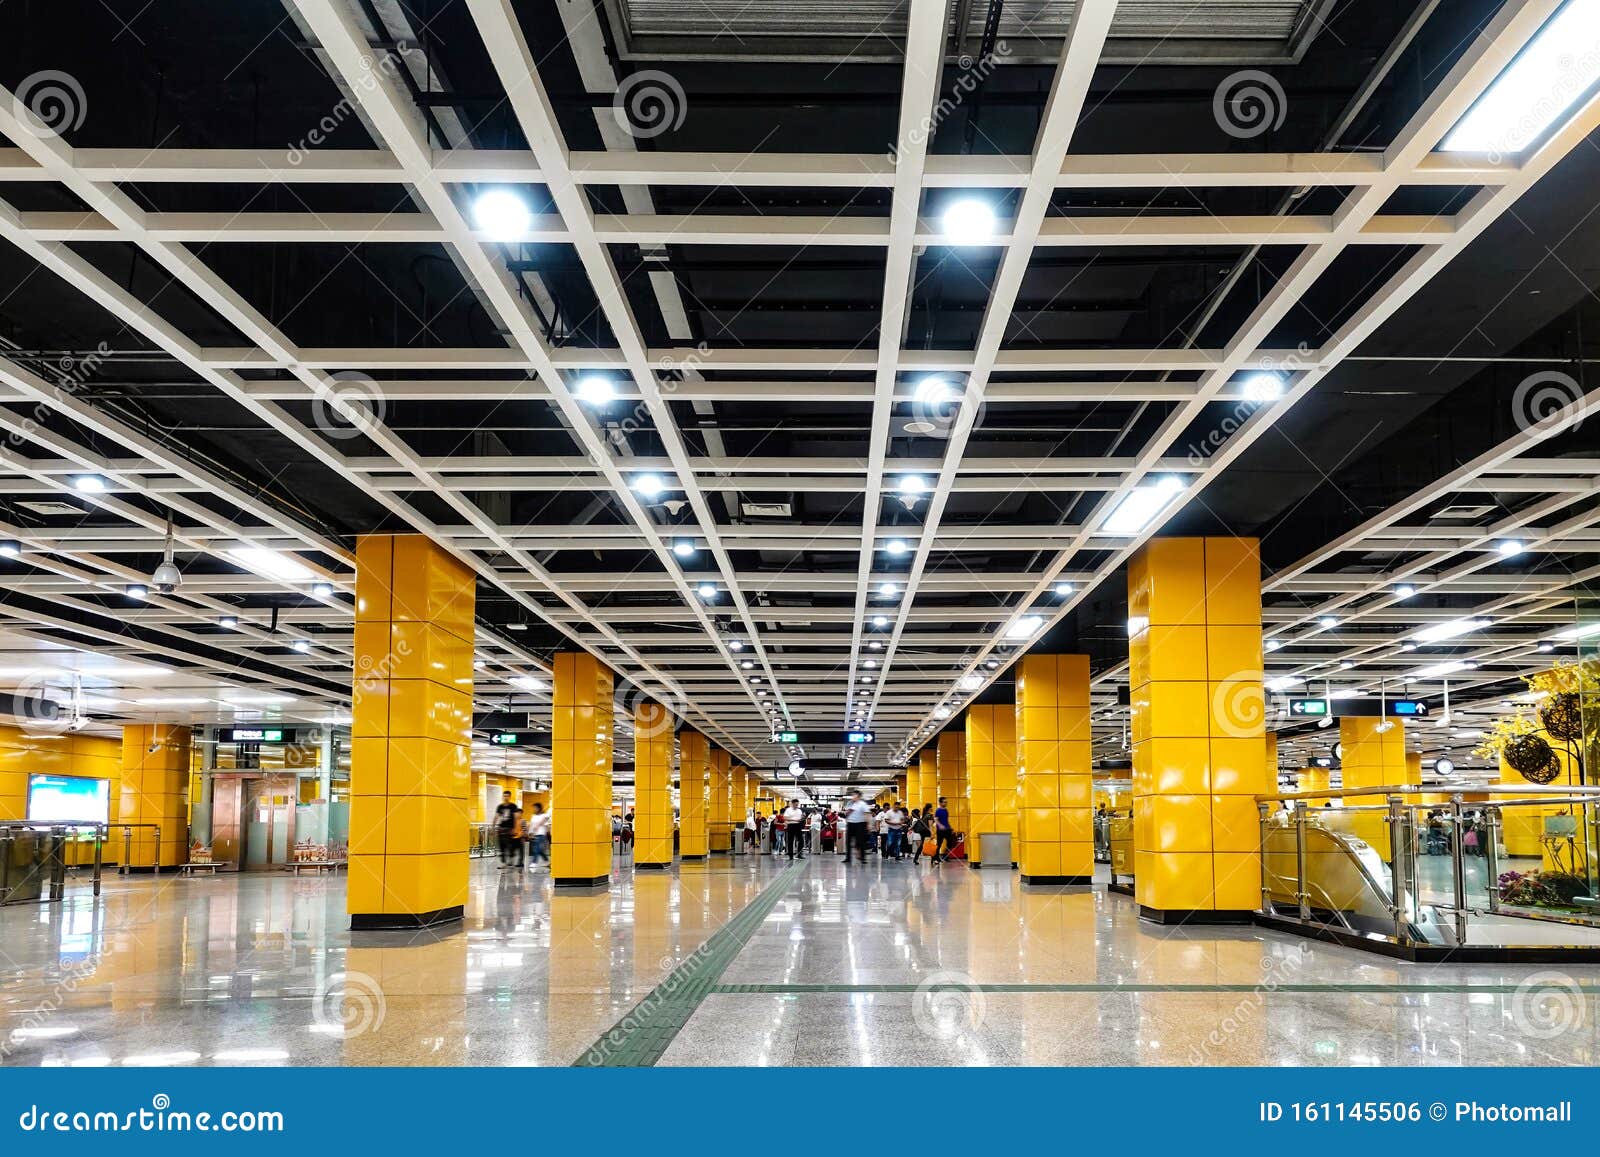 modern commercial building  interior  subway station